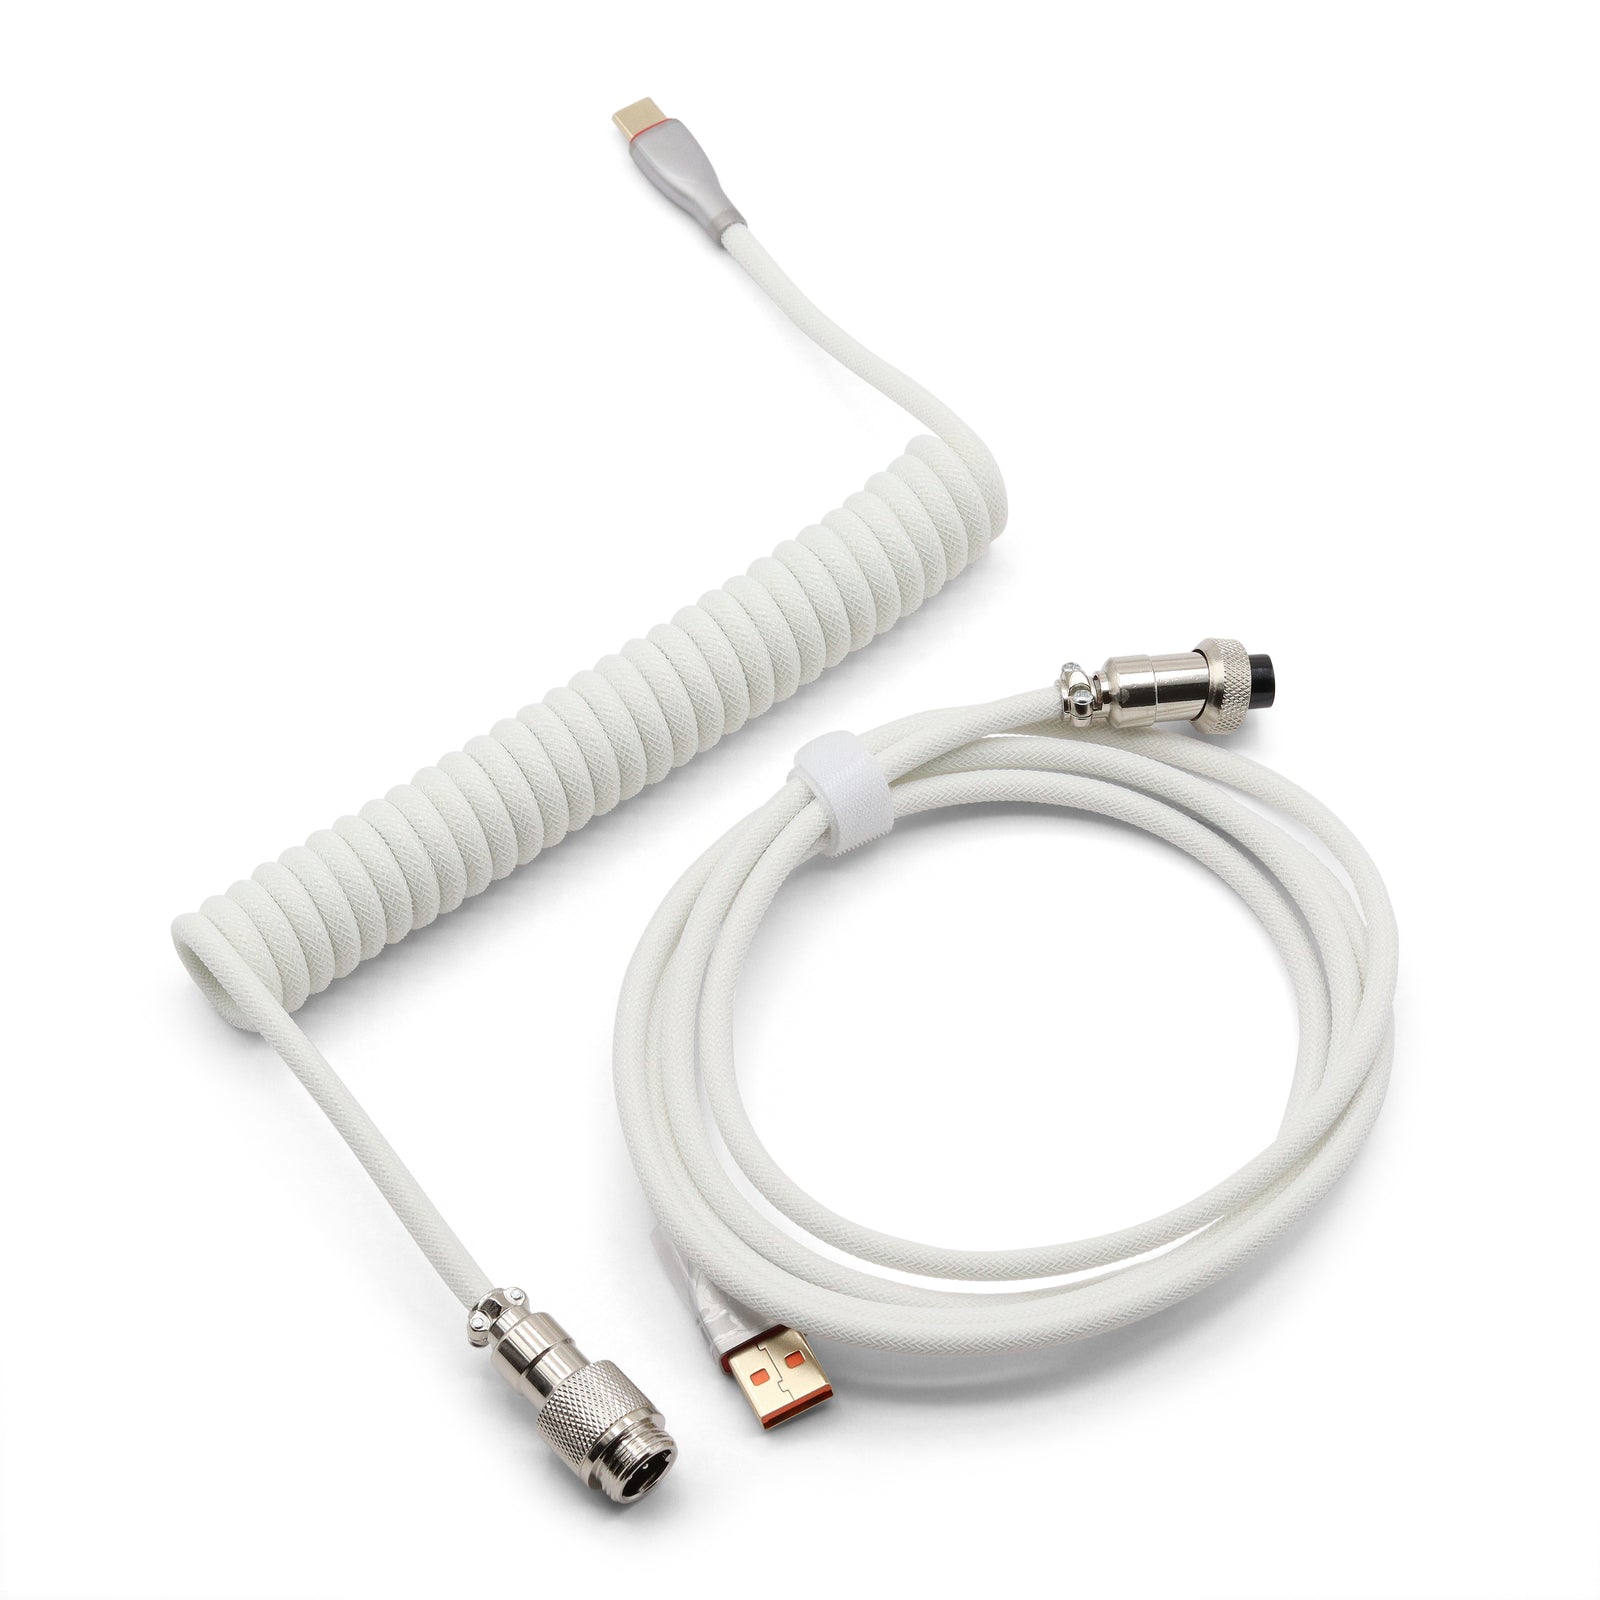 Glacier Premium Durable Quality Braided USB-C to USB-A Coiled Cable with Detachable Metal Aviator Connector Plug for Mechanical Keyboard